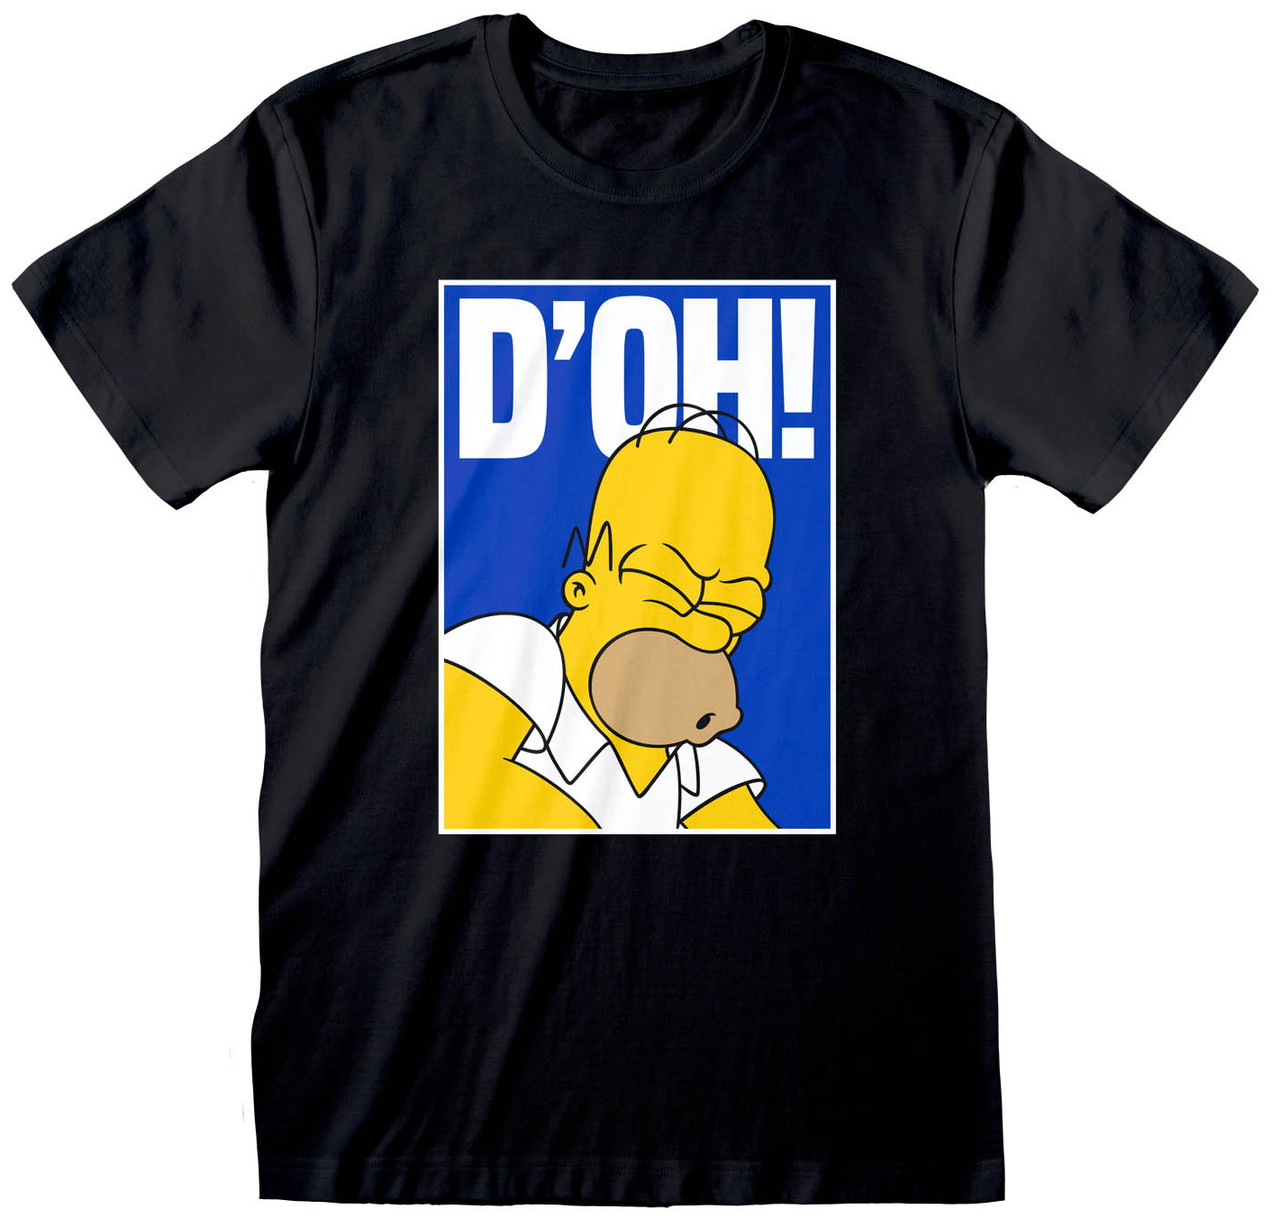 The Simpsons - Doh! (Large)